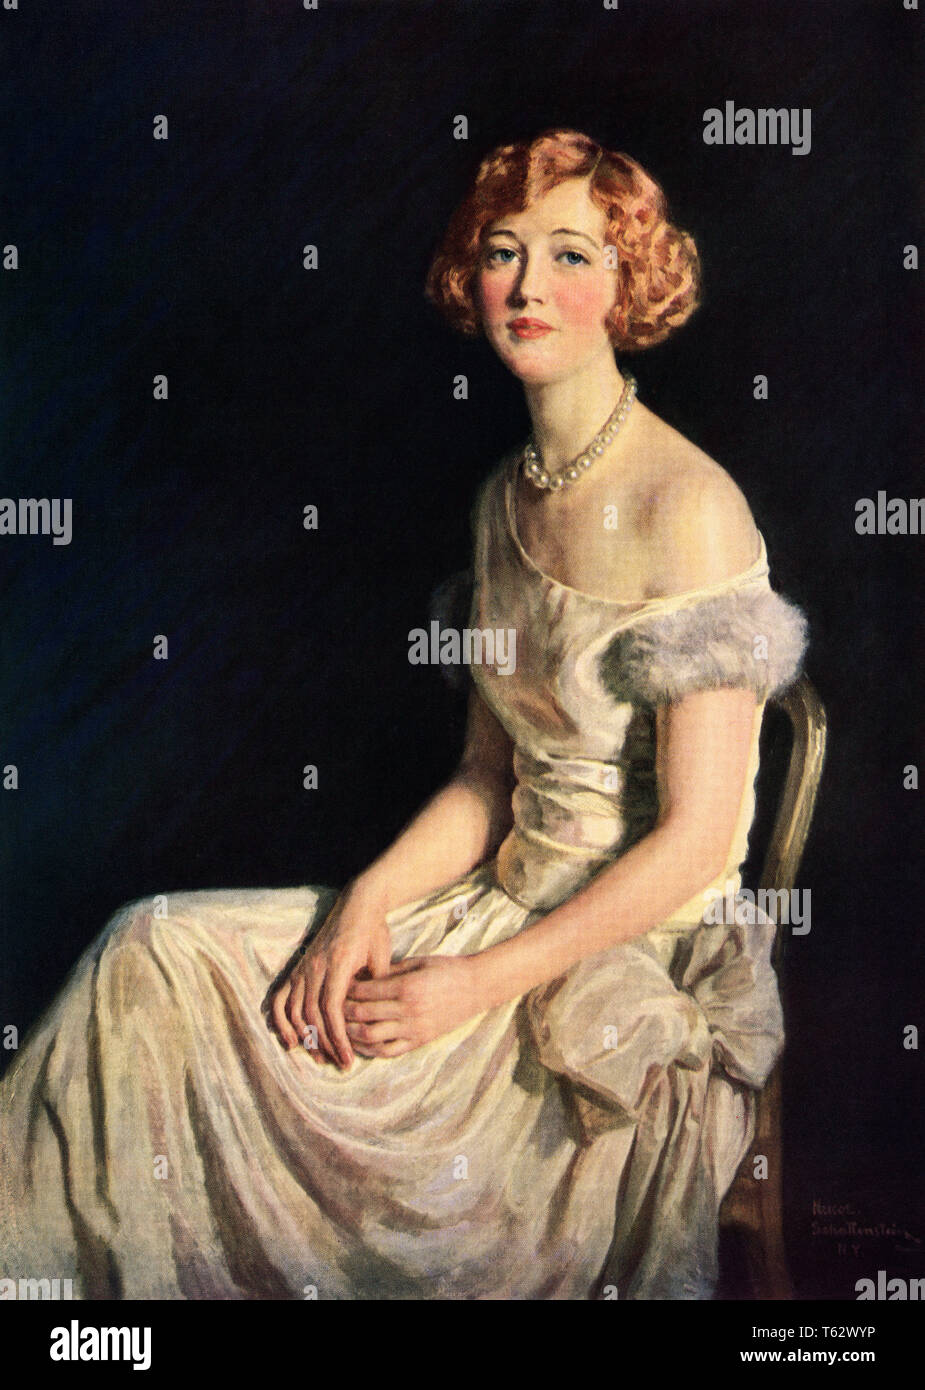 1920s 1930s PORTRAIT MARION DAVIES LOOKING AT CAMERA BY SCHATTENSTEIN ACTRESS COMPANION WILLIAM RANDOLPH HEARST COLOR HALFTONE - kh13291 CPC001 HARS OCCUPATIONS COMPANION STYLISH MARION FASHIONS MID-ADULT MID-ADULT WOMAN CAUCASIAN ETHNICITY OLD FASHIONED RANDOLPH WILLIAM Stock Photo